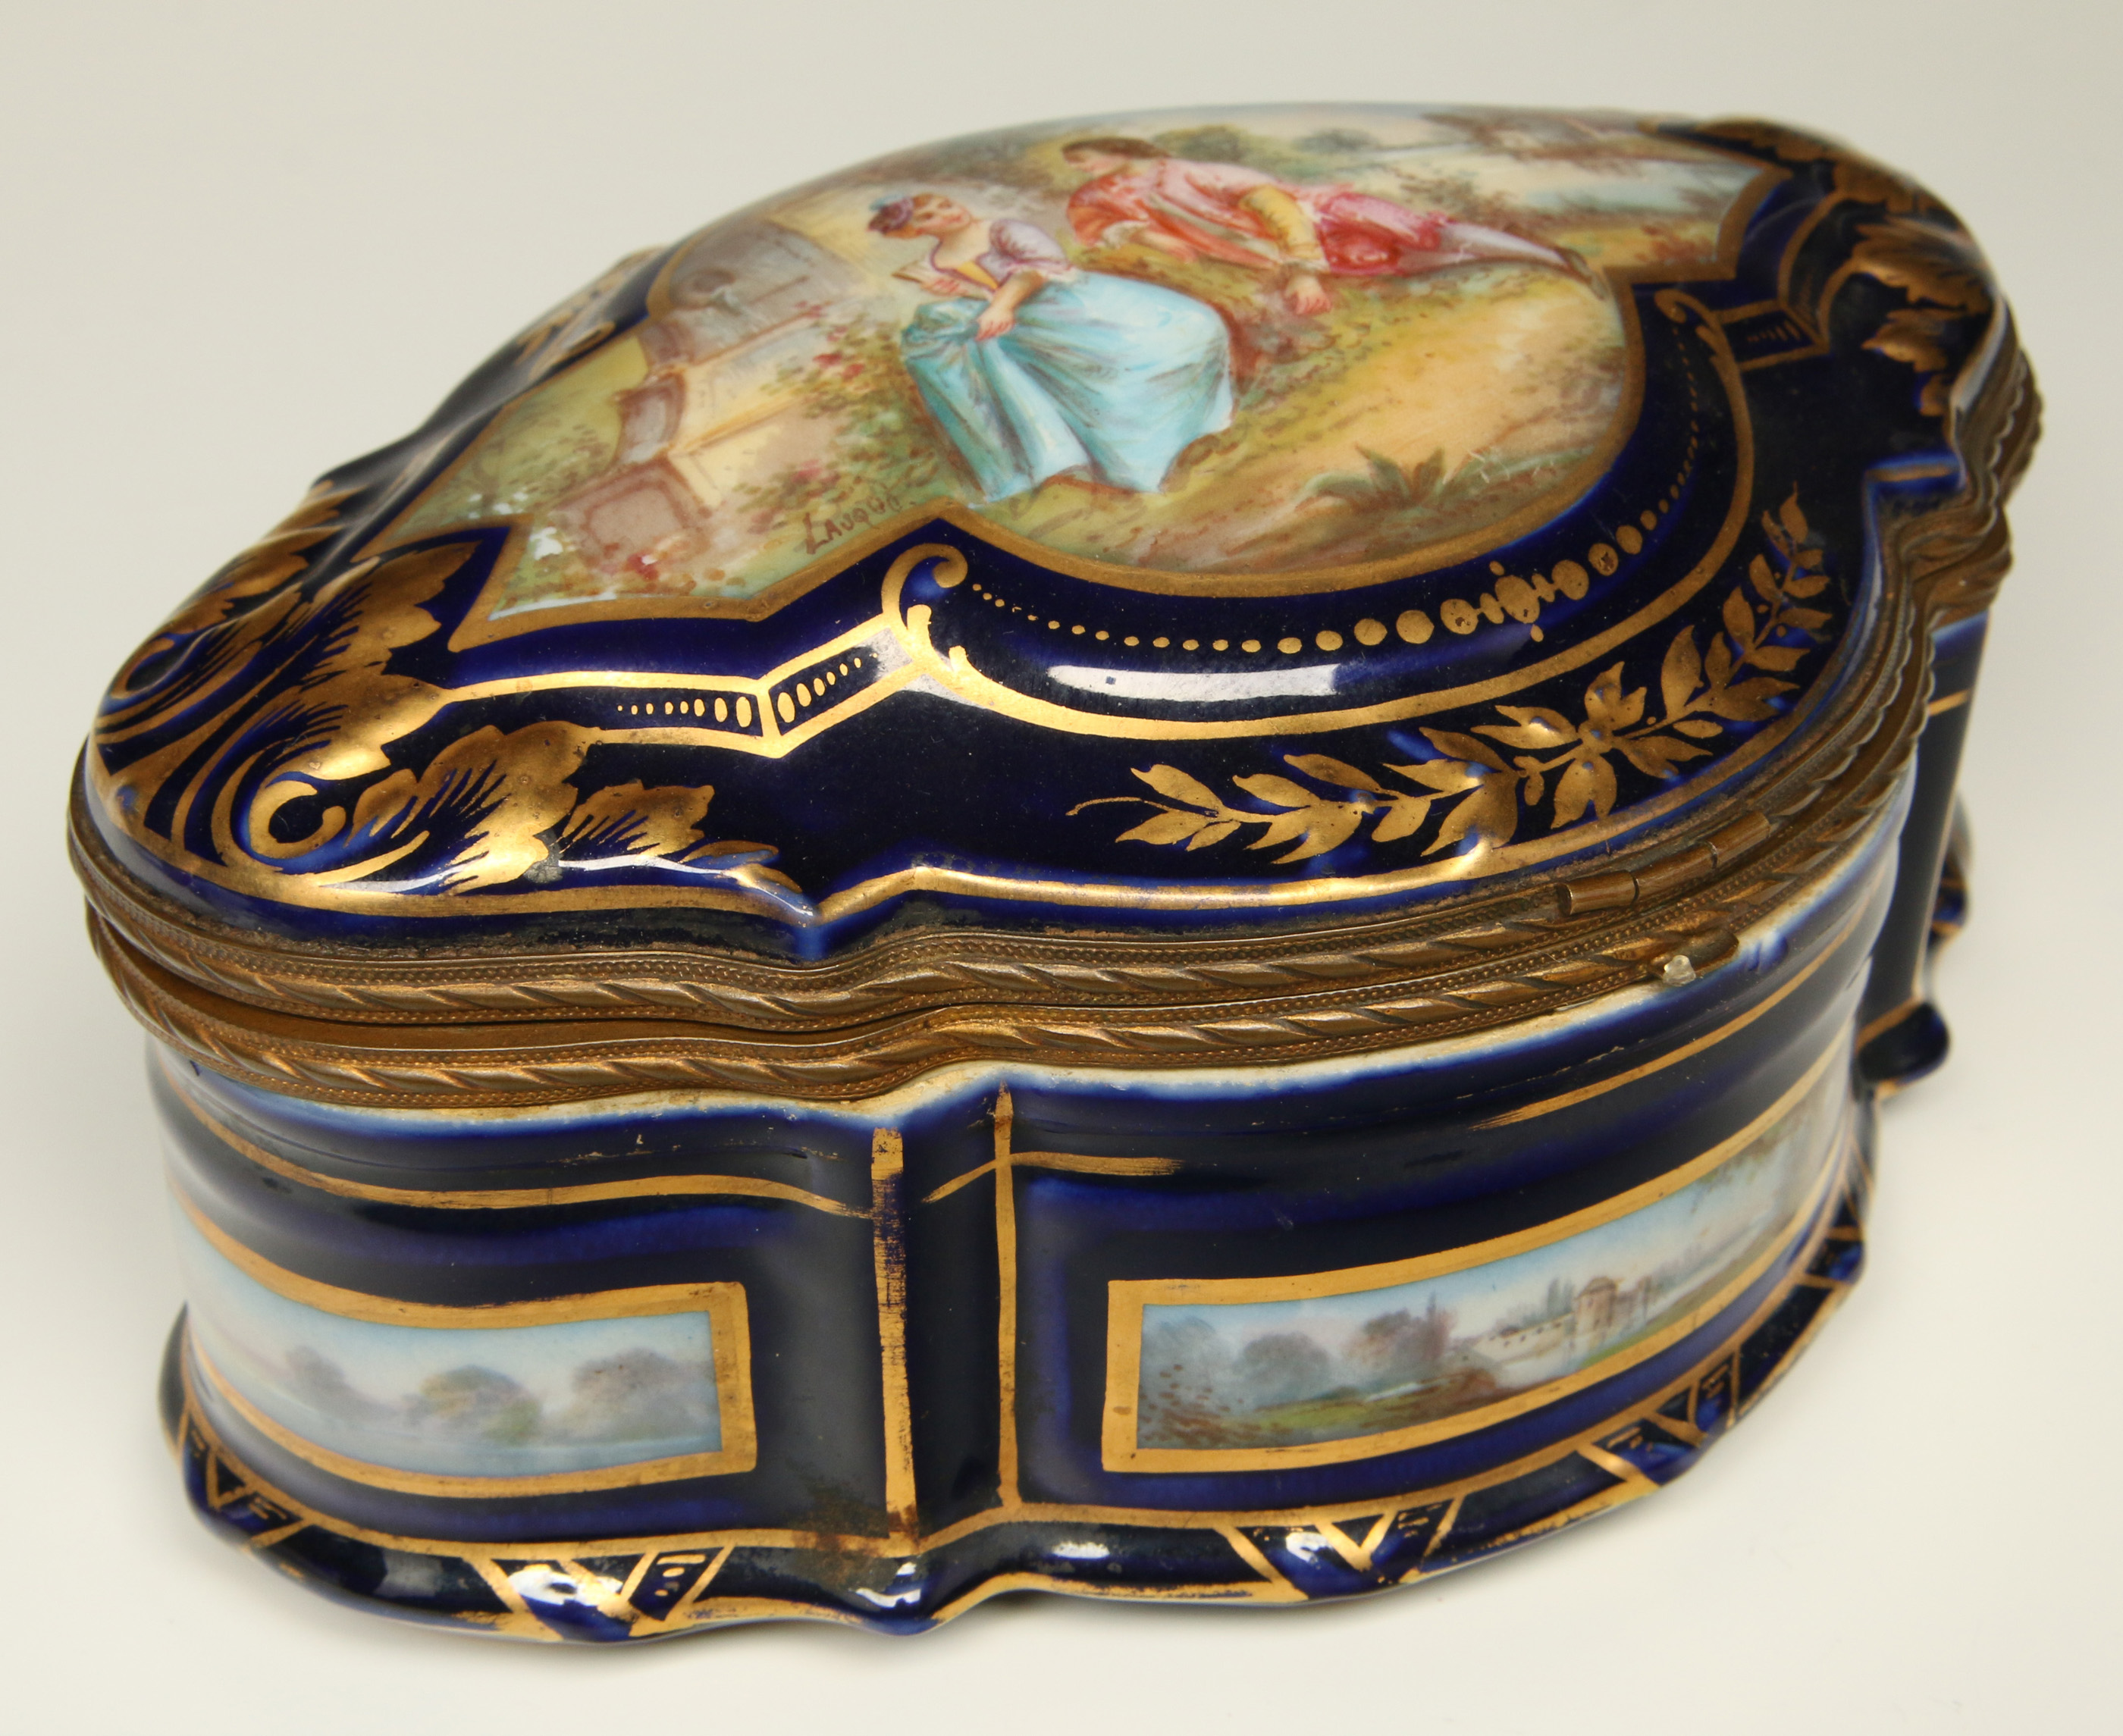 A 19TH C FRENCH PORCELAIN BOX, STYLE OF SEVRES